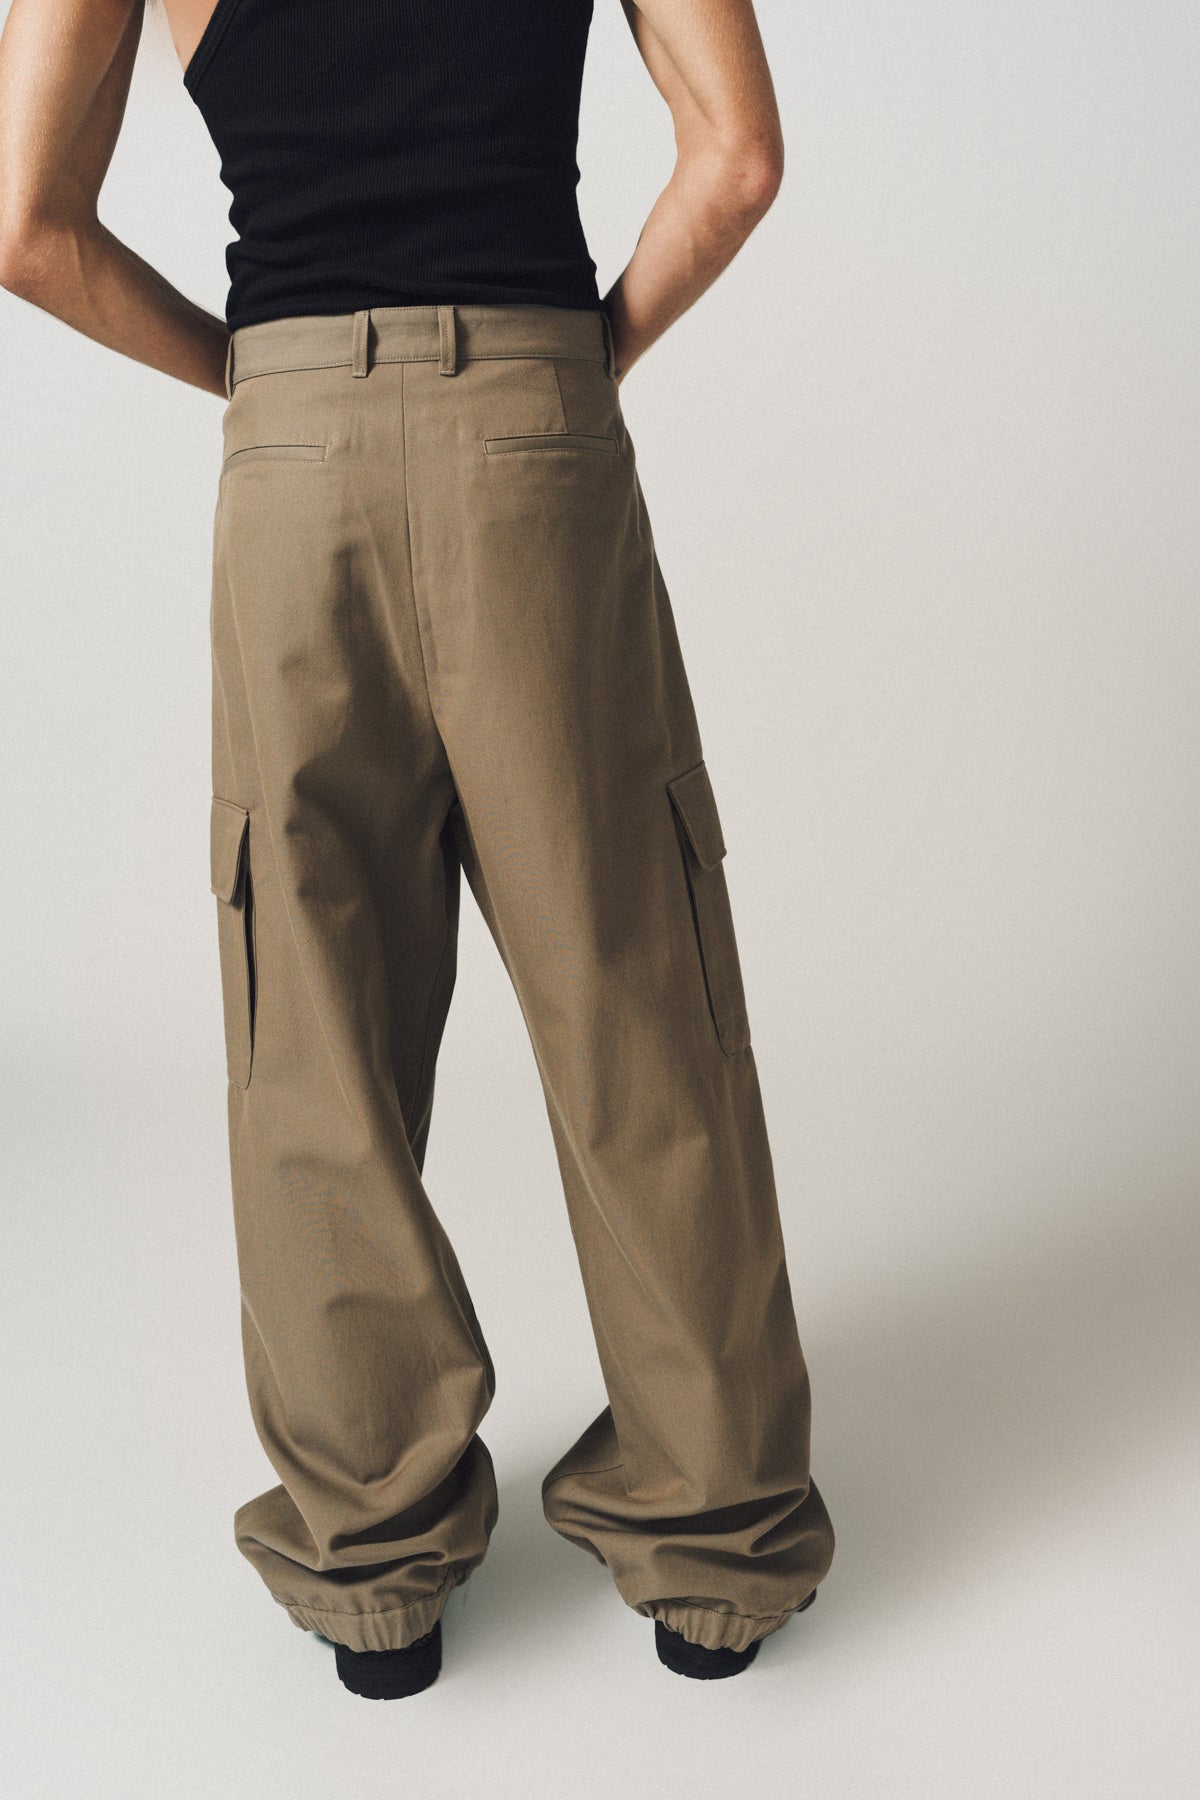 OFF-WHITE | EMBROIDERED WOOL CARGO PANTS